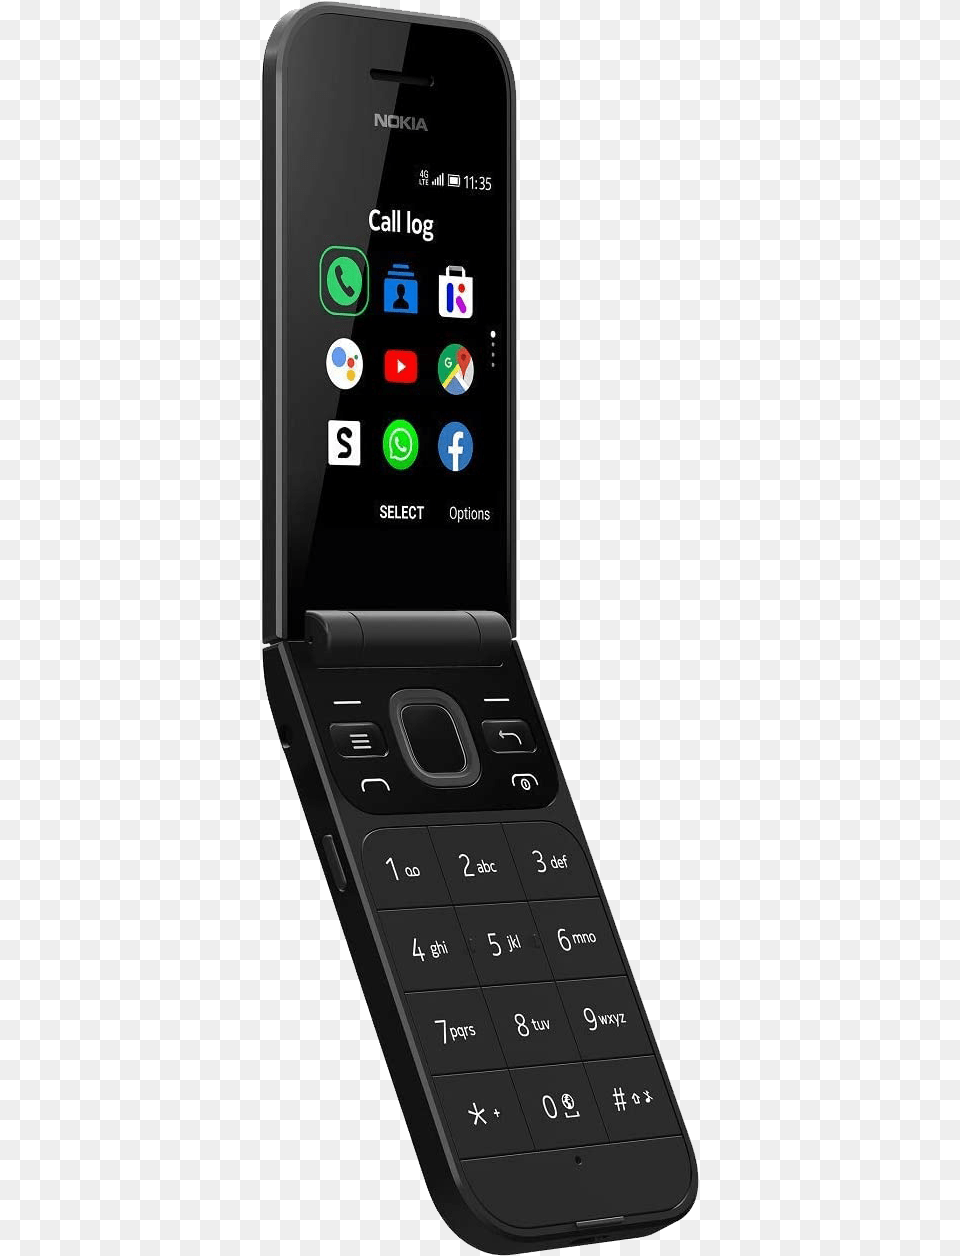 Best Flip Phones In 2021 Nokia Folding Phone New, Electronics, Mobile Phone, Texting Png